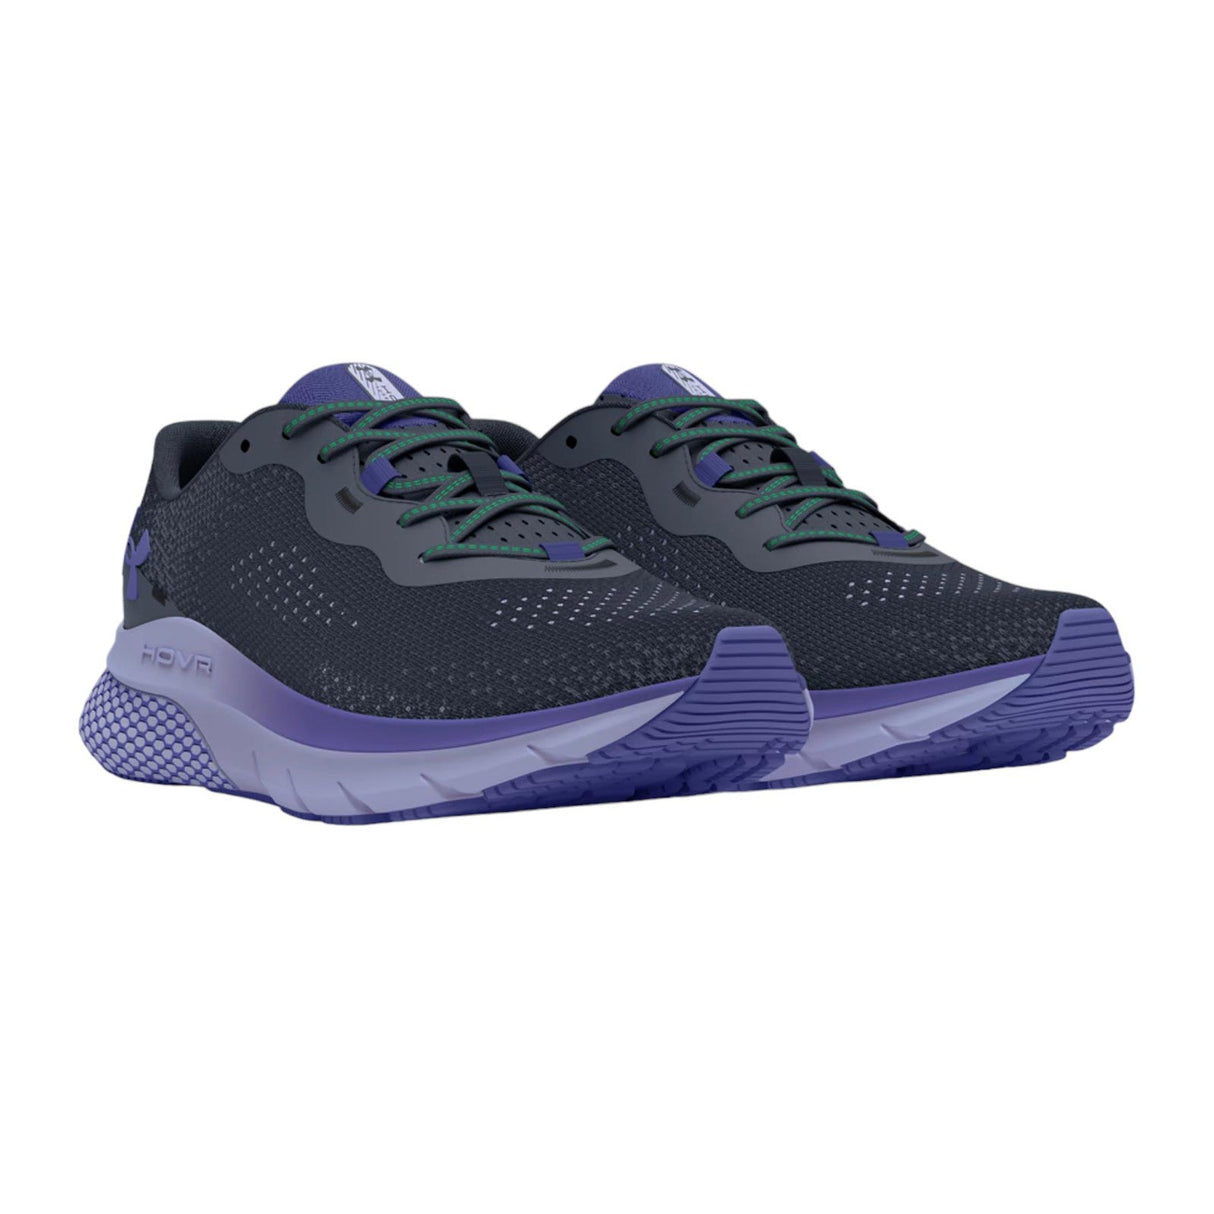 Under Armour HOVR Turbulence 2 Womens Running Shoes